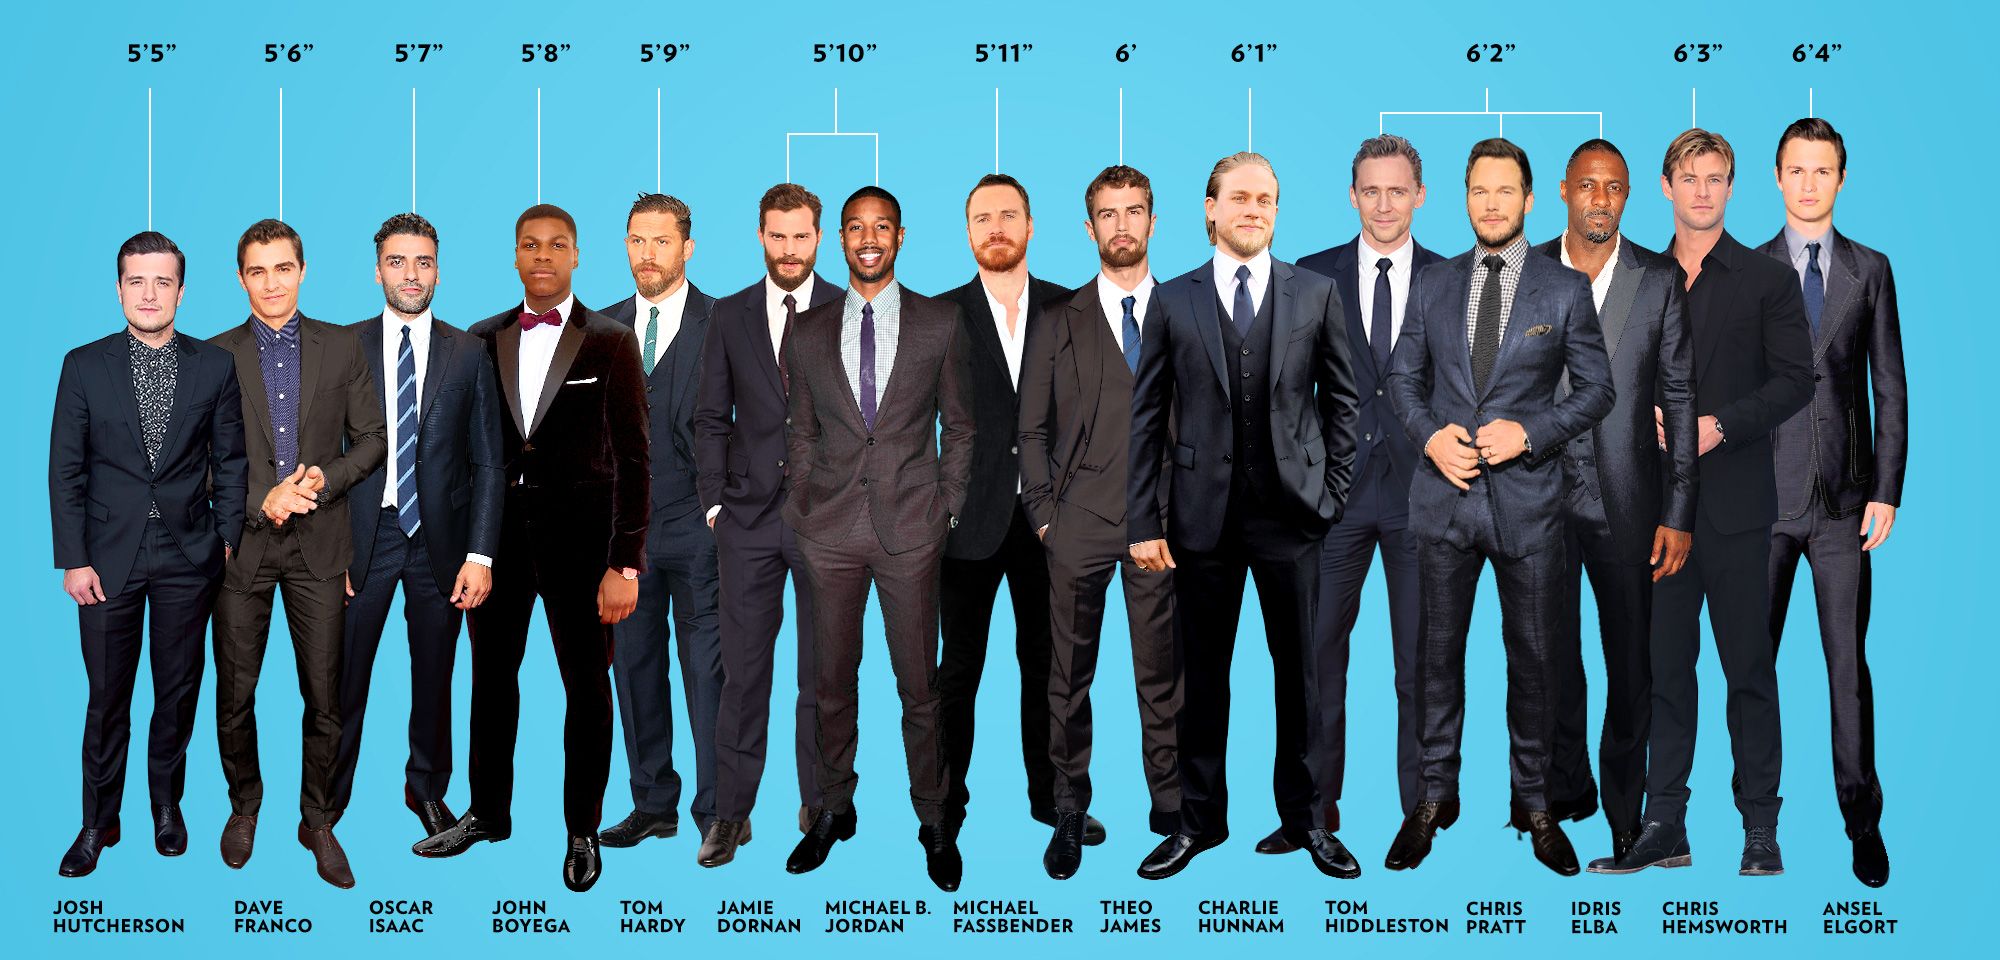 Heights of various leading men